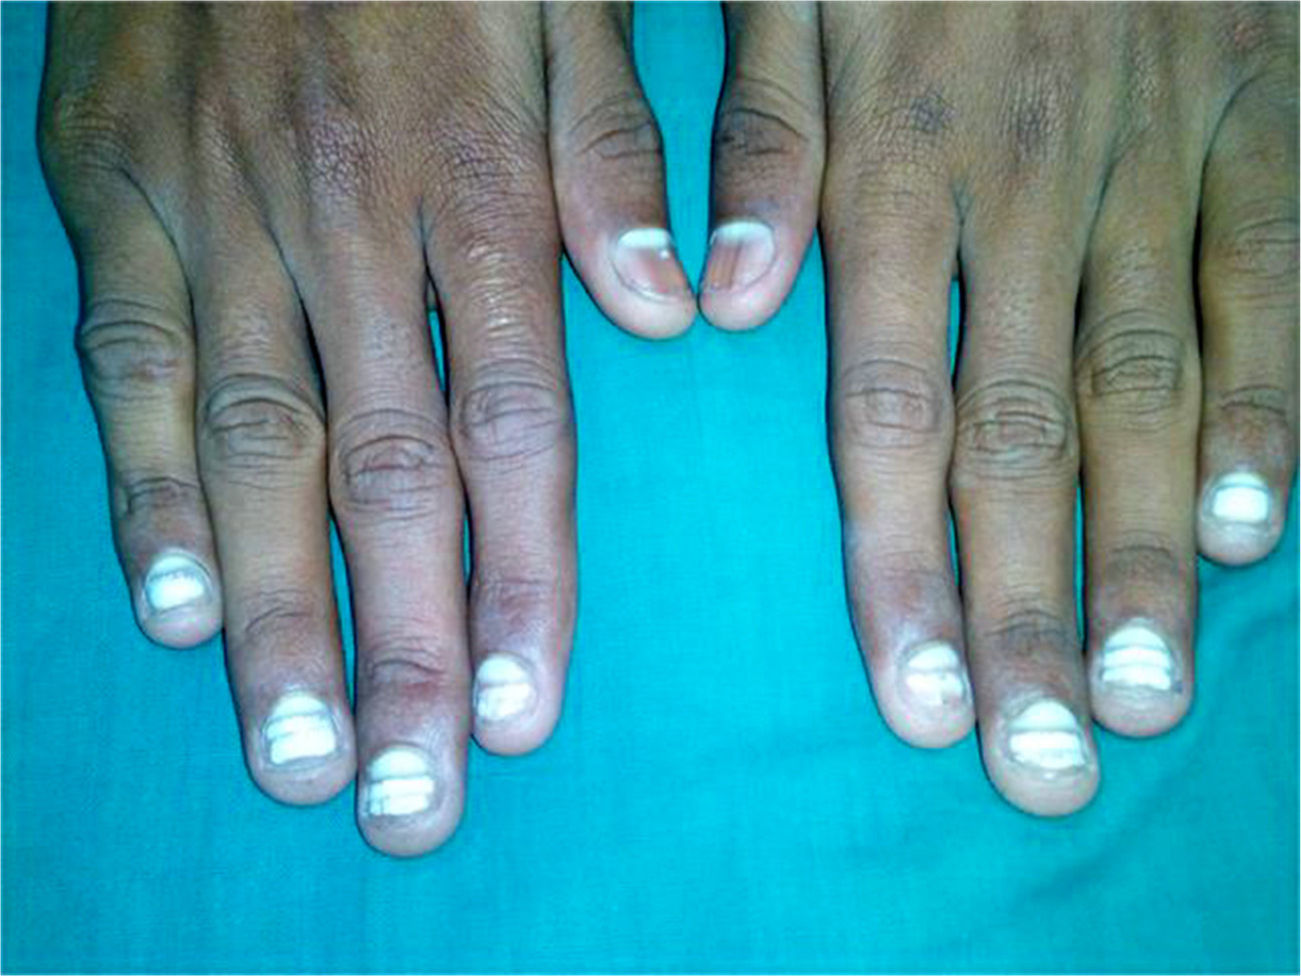 Idiopathic Acquired Leukonychia Totalis of the Fingernails in a Child ...